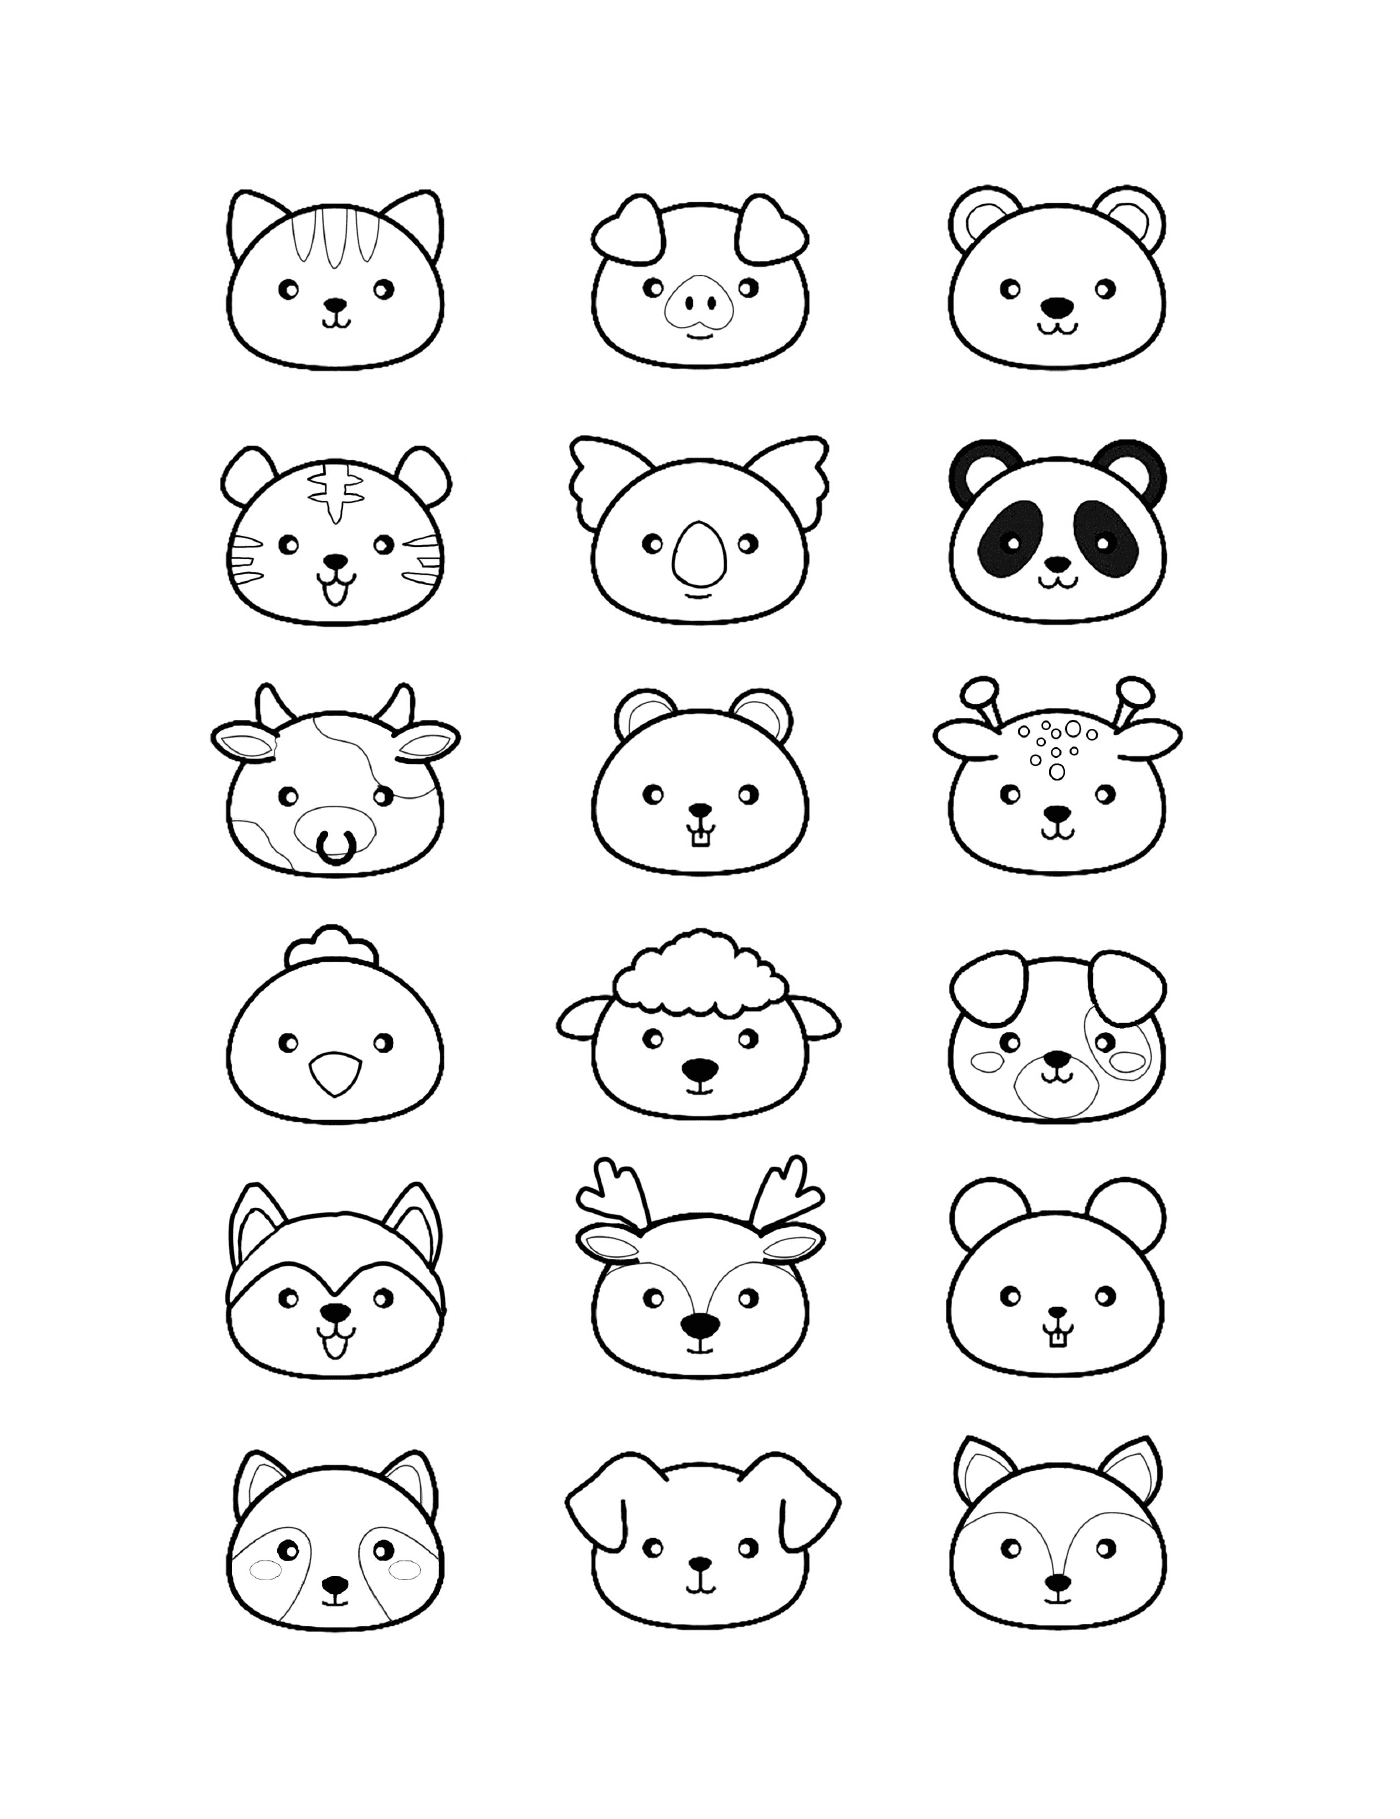  Different faces of kawaii animals 